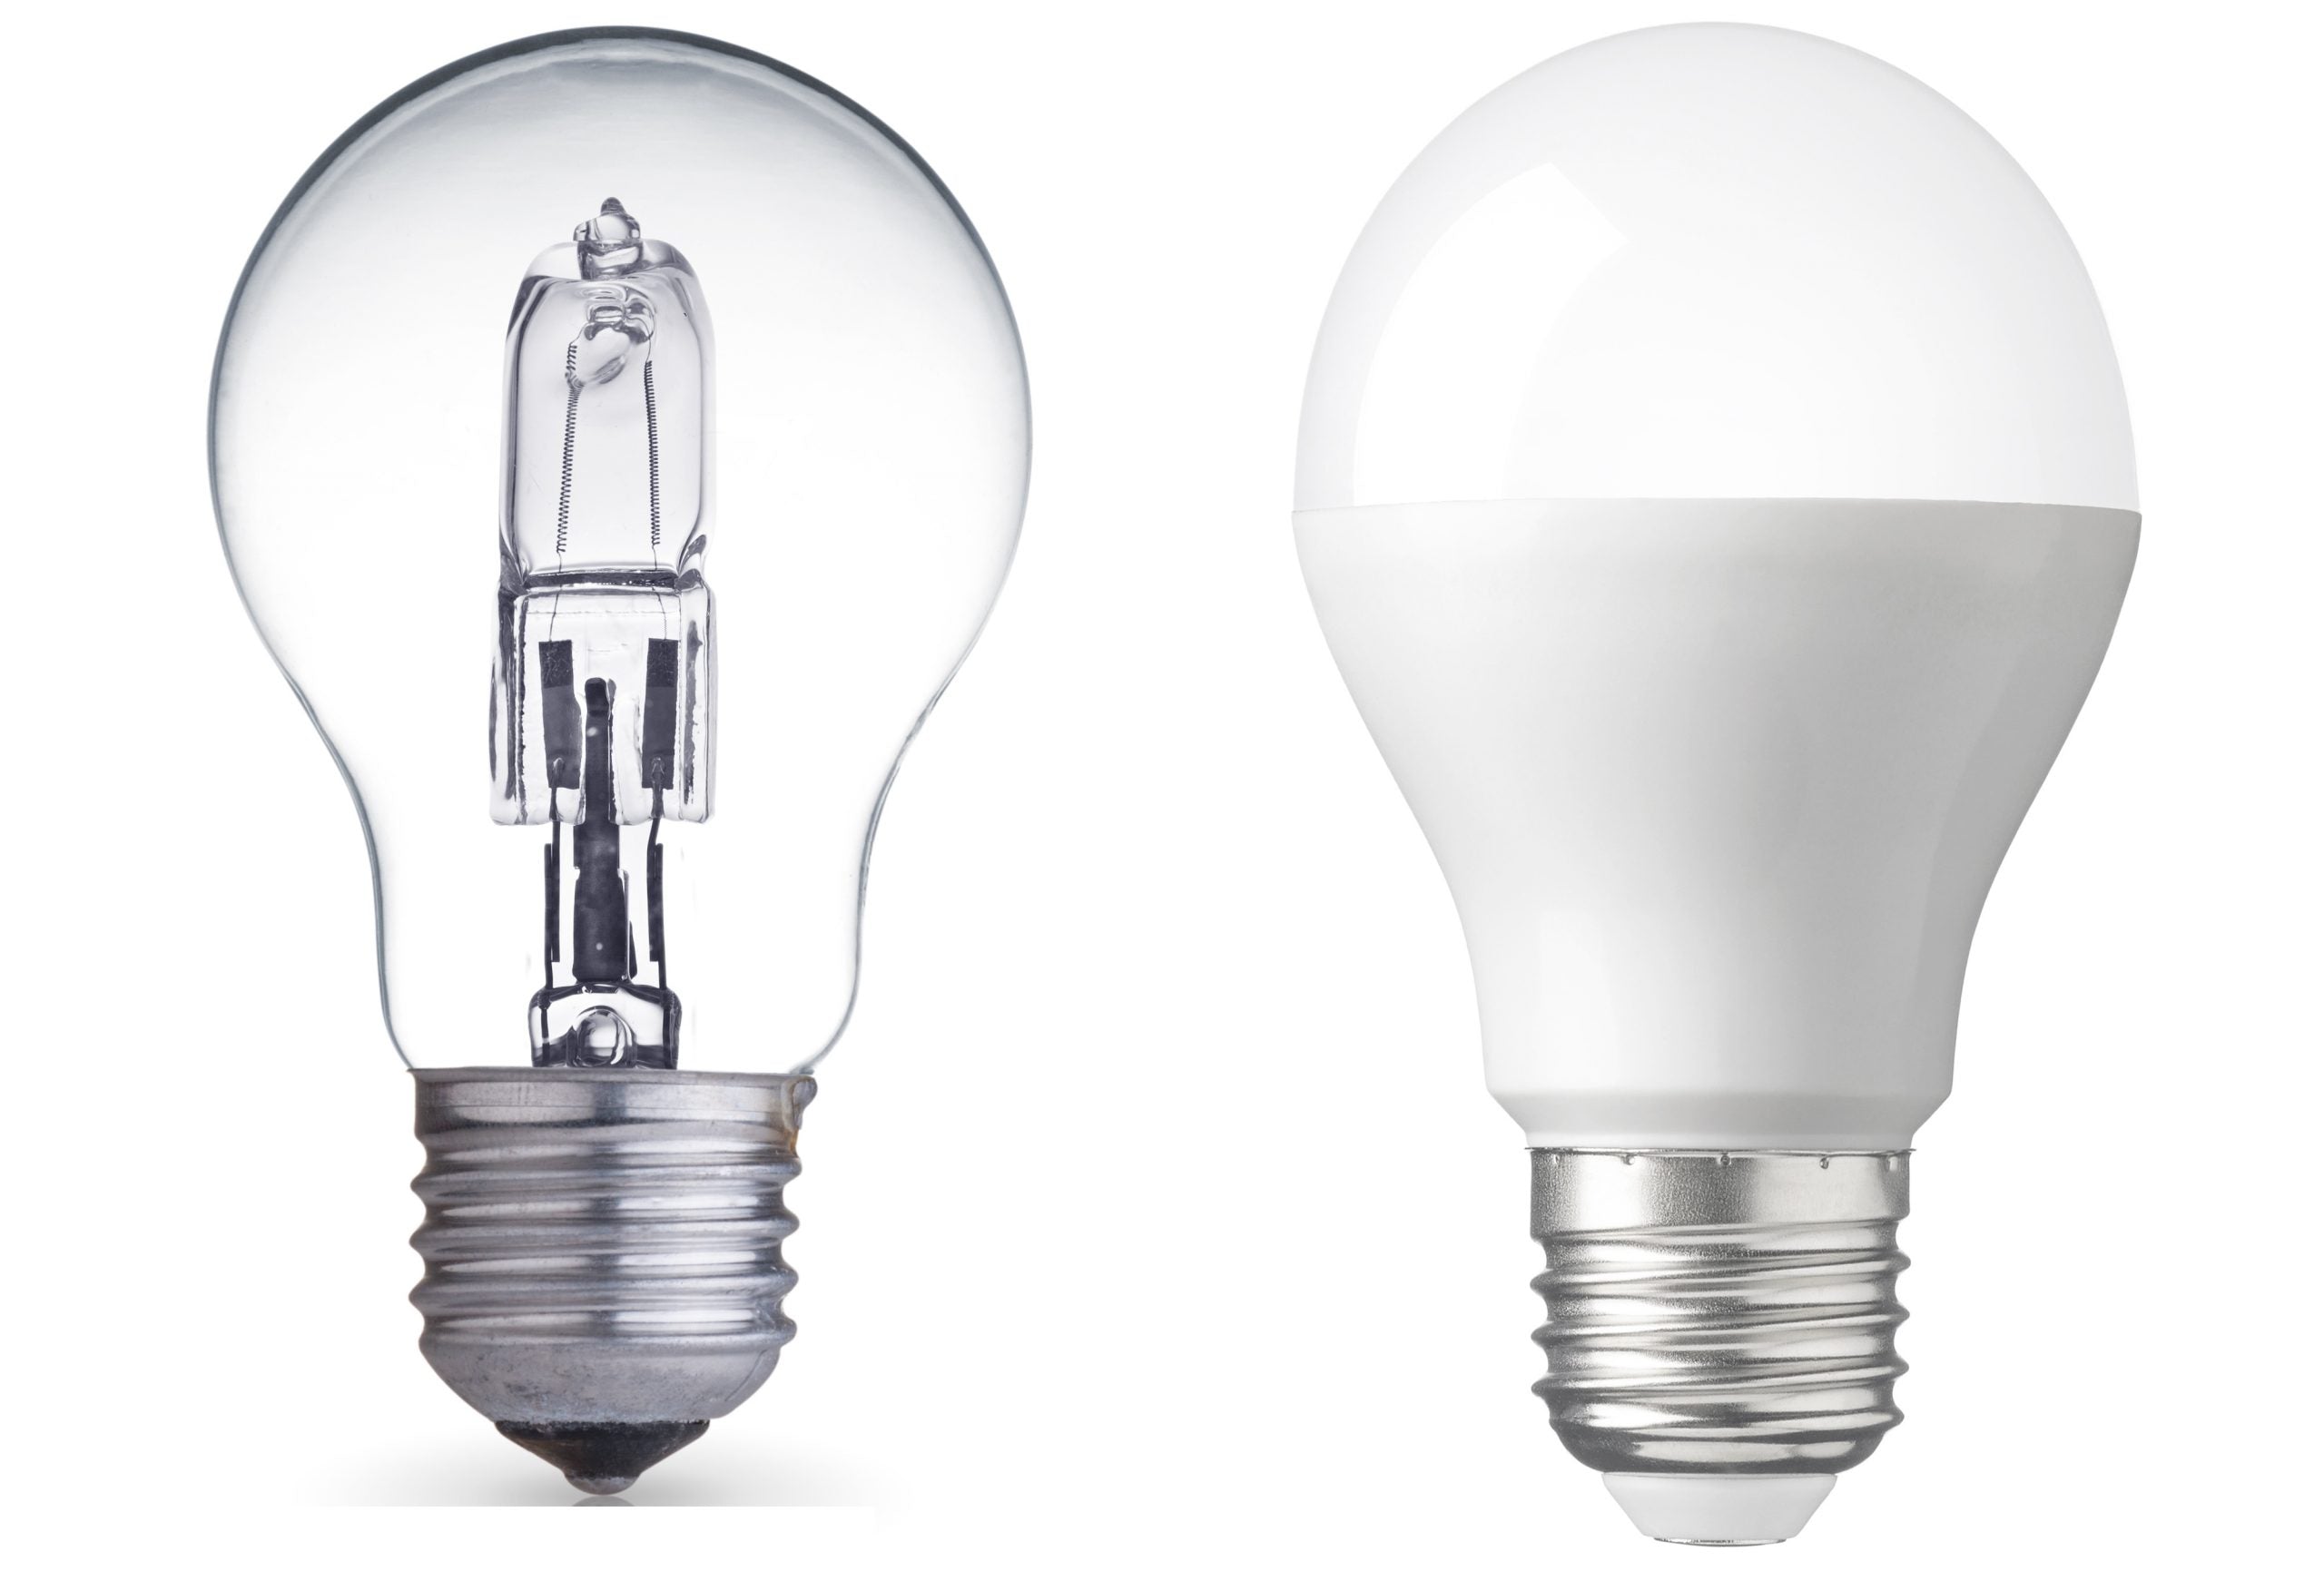 Which Is Better LED Or Halogen Or Incandescent For Your Landscape Lighting?